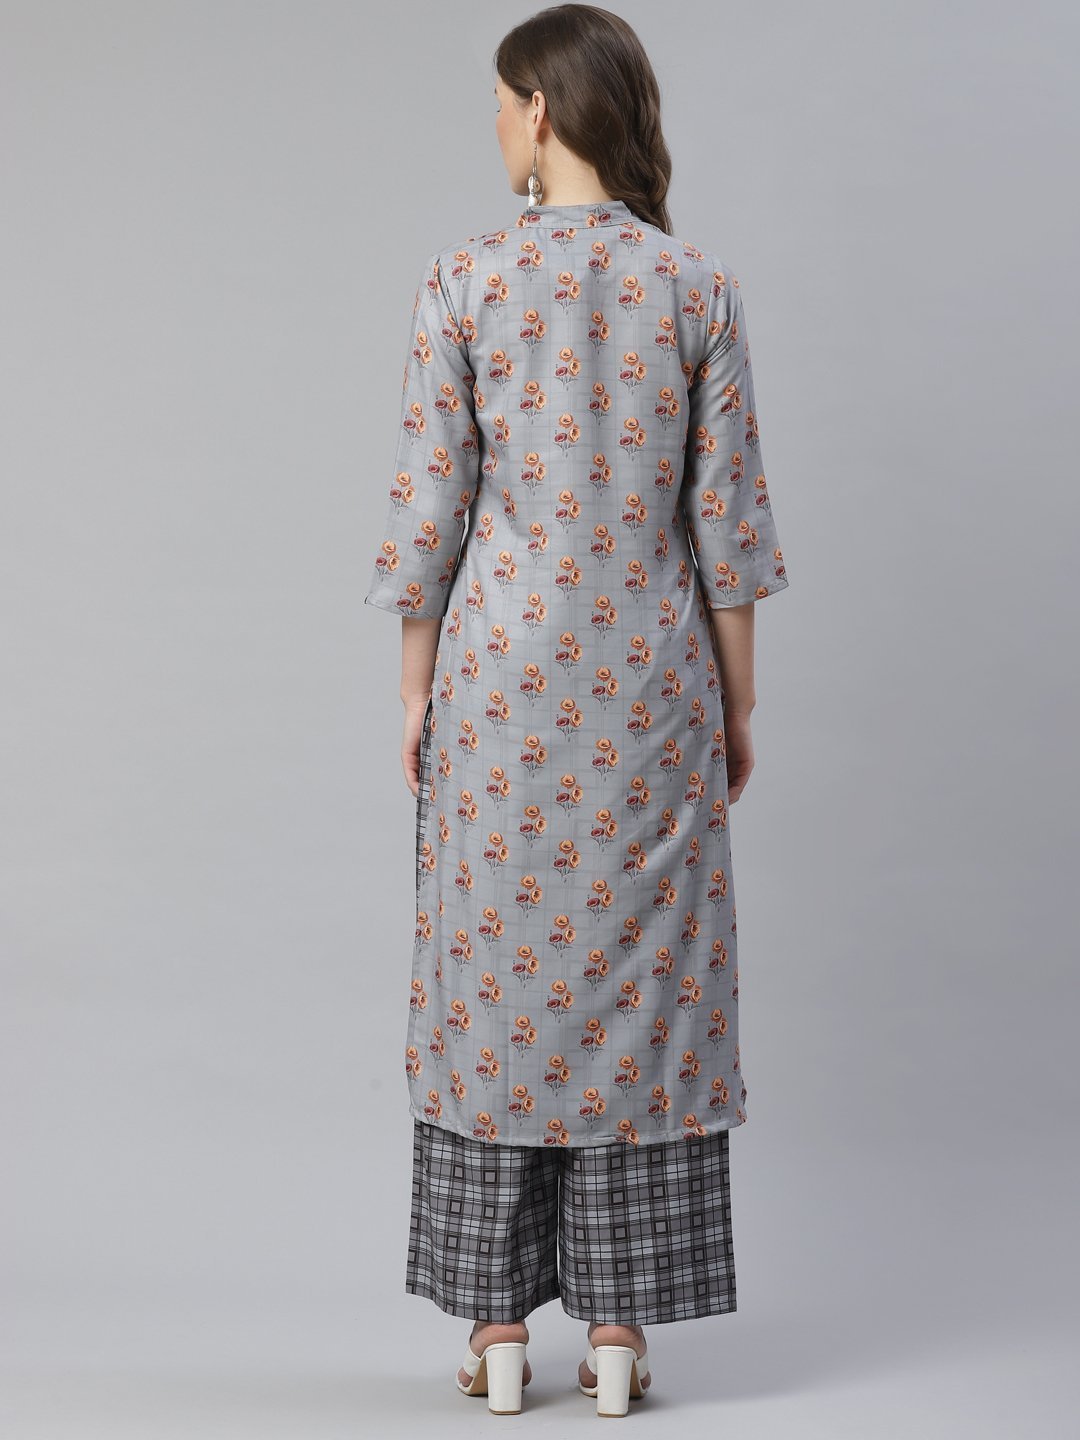 Women's Grey & Beige Floral Printed Kurta with Palazzos - Jompers